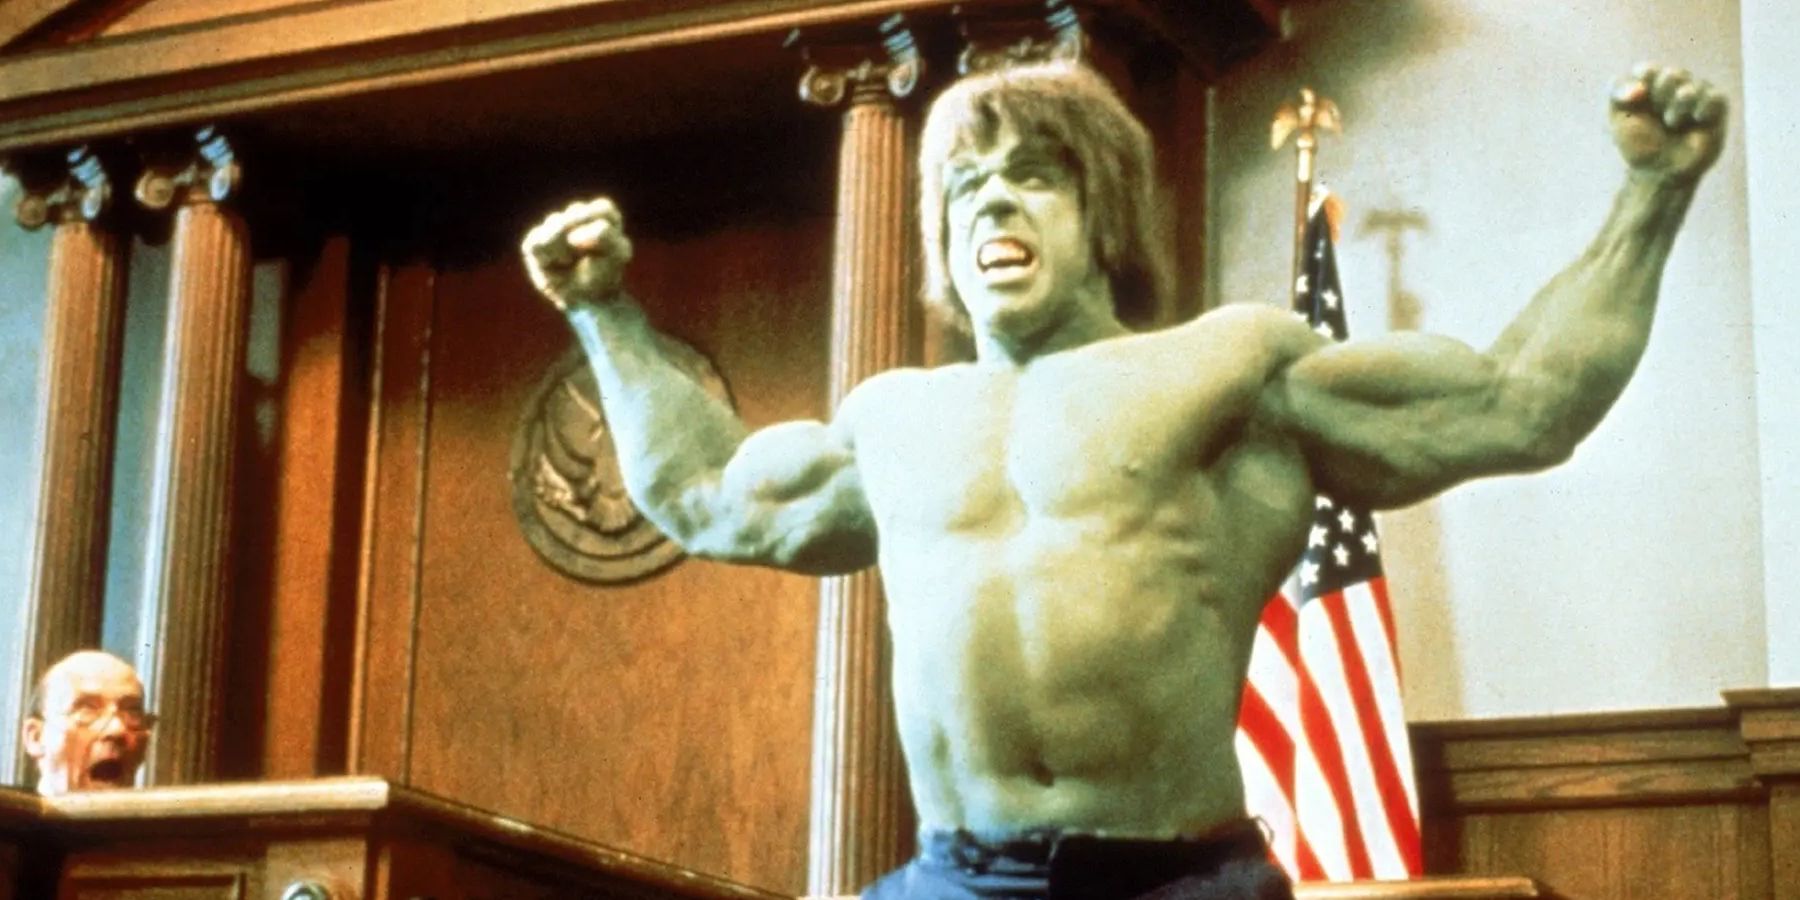 Hulk flexing in a courtroom in 'The Trial of the Incredible Hulk'